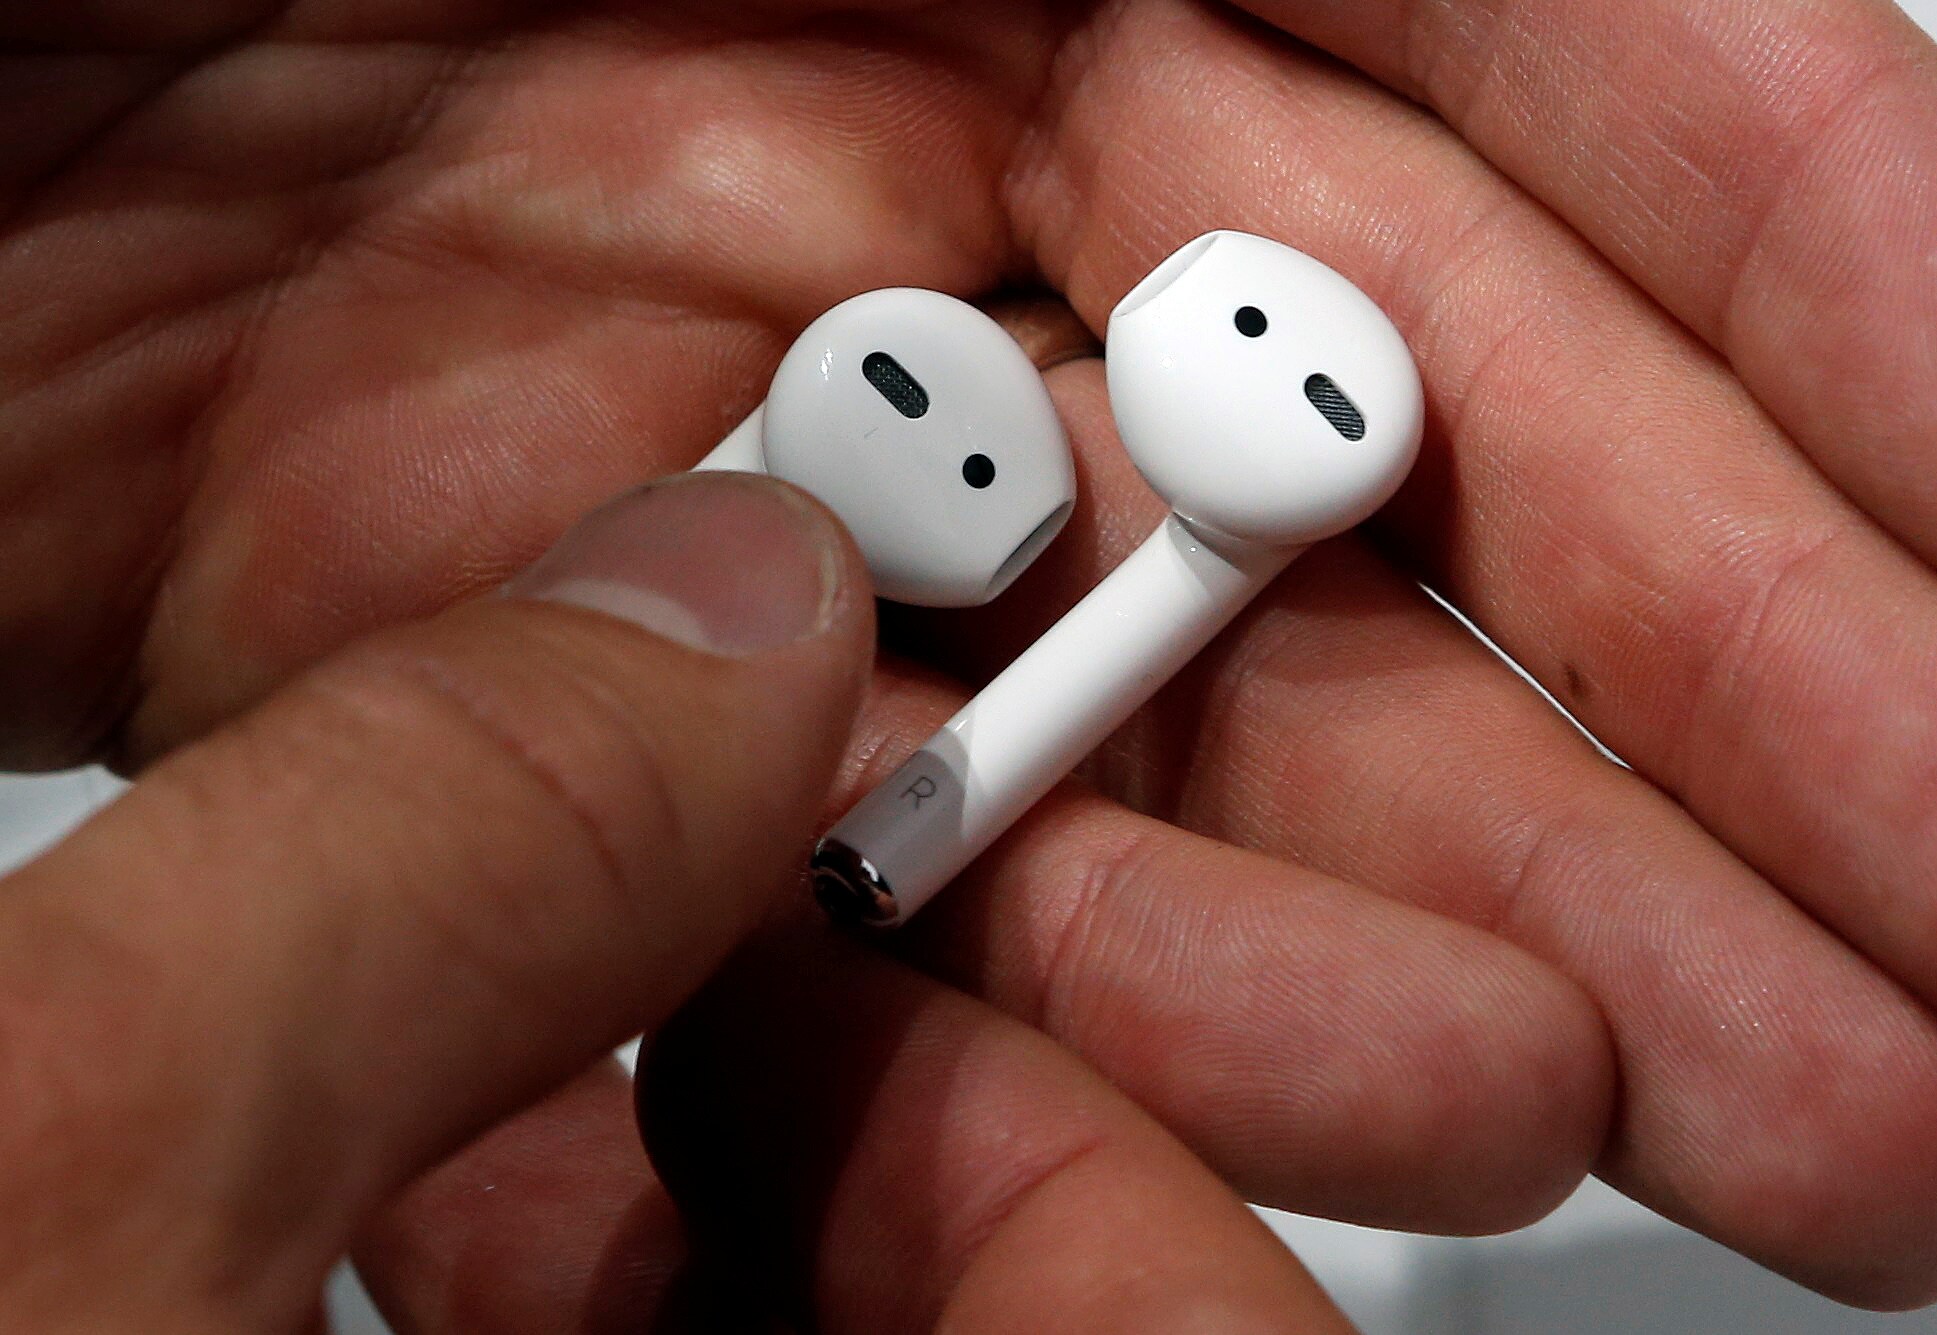 Apple AirPods are displayed during a media event in San Francisco, California, U.S. September 7, 2016. REUTERS/Beck Diefenbach/File Photo